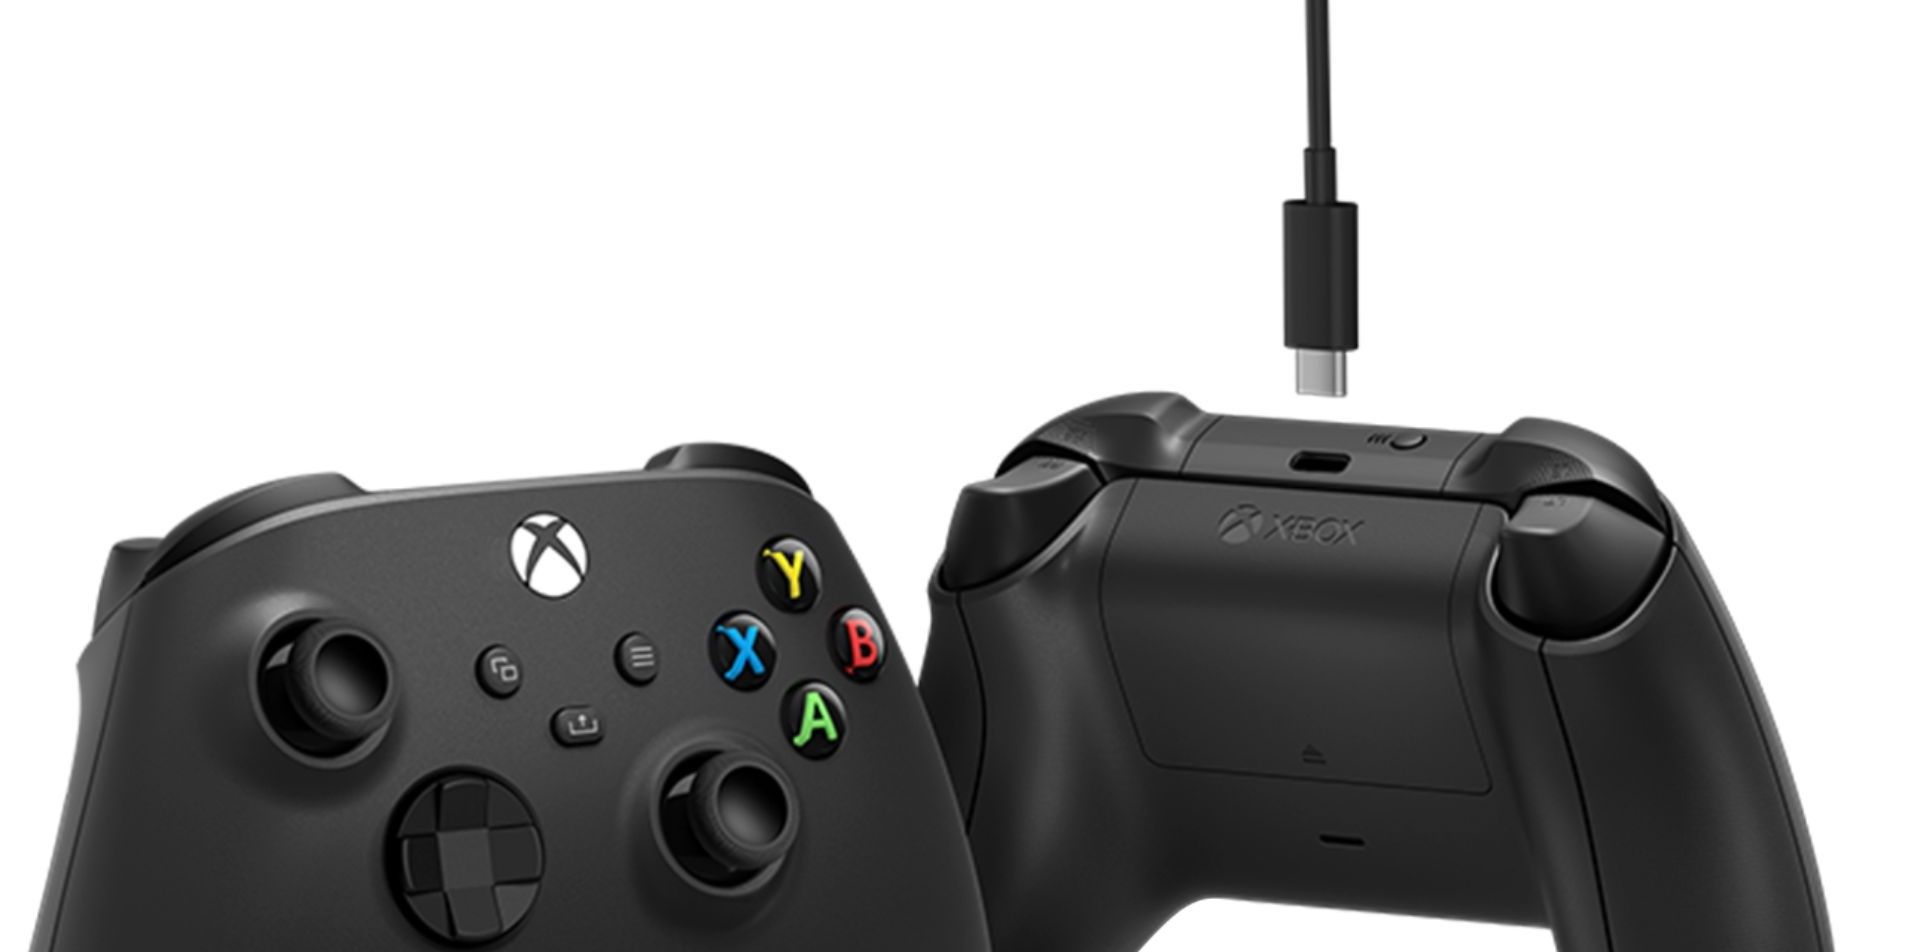 How To Pair An Xbox Controller To Your PC